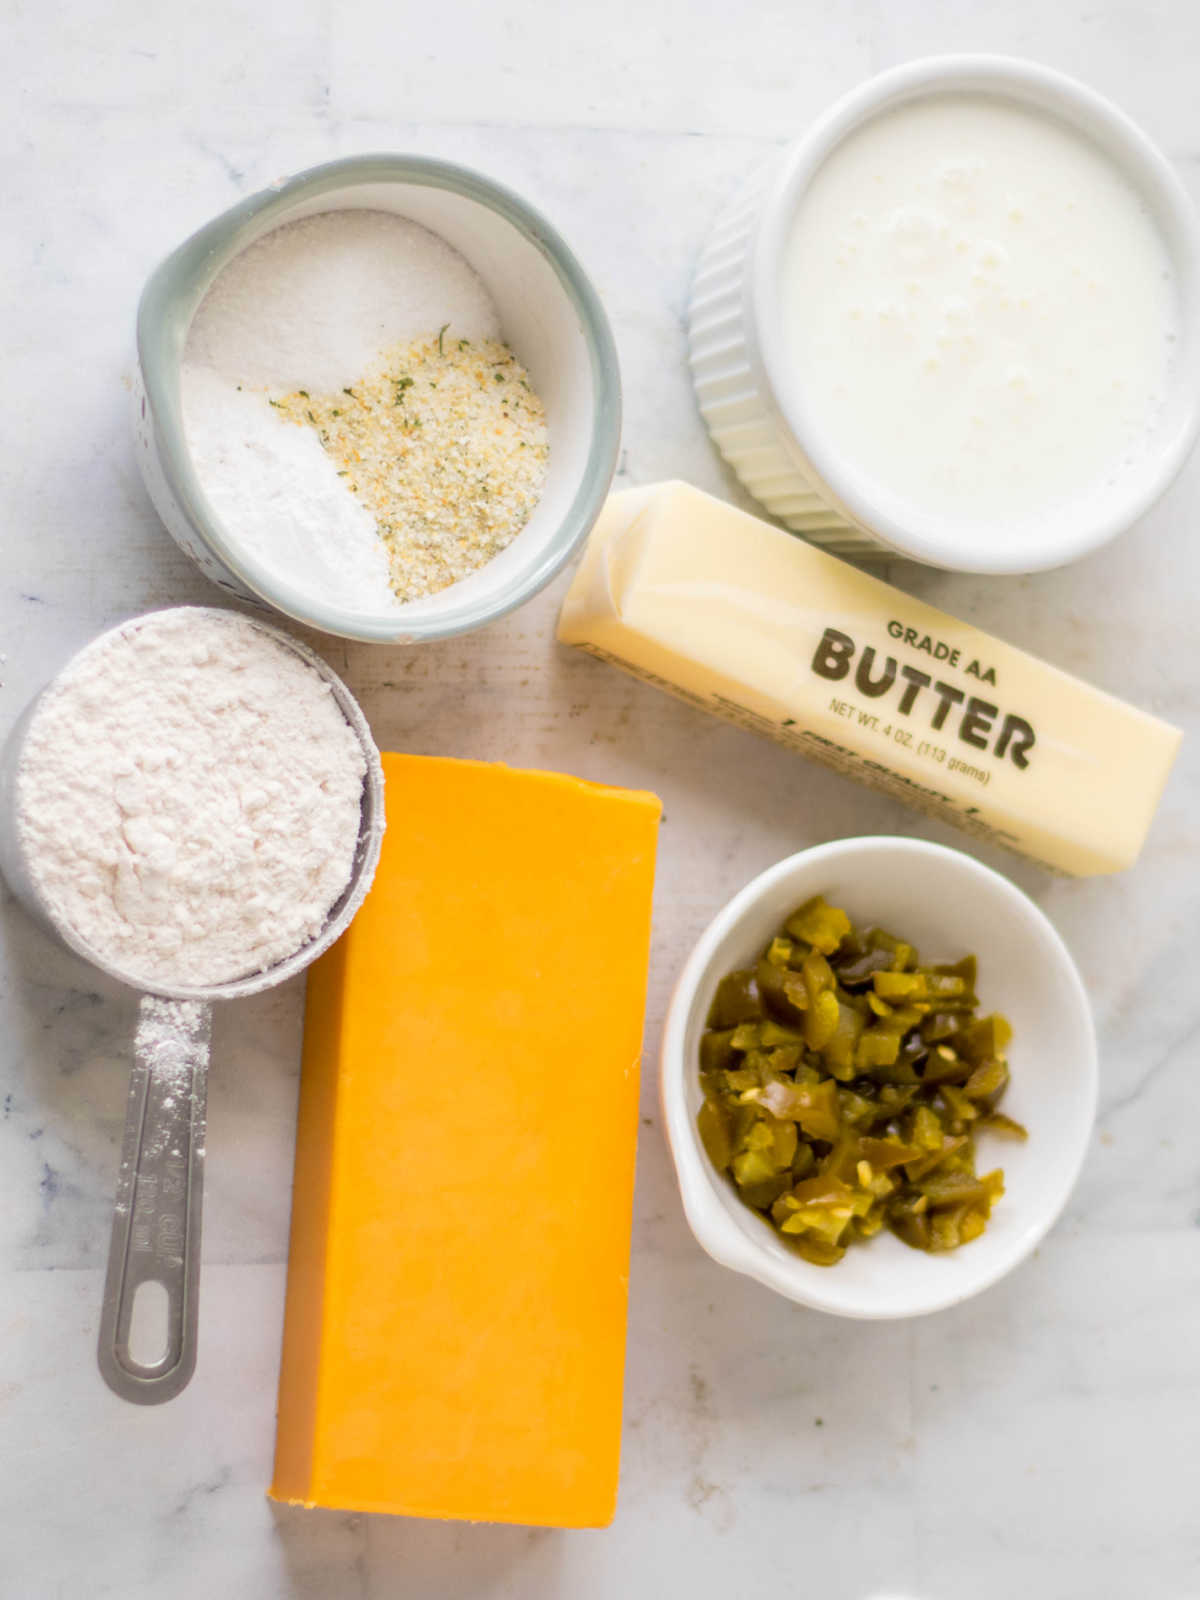 Ingredients including cheddar, jalapenos, butter, buttermilk, flour, baking powder, garlic salt and sugar ready to be made into butter swim biscuits.